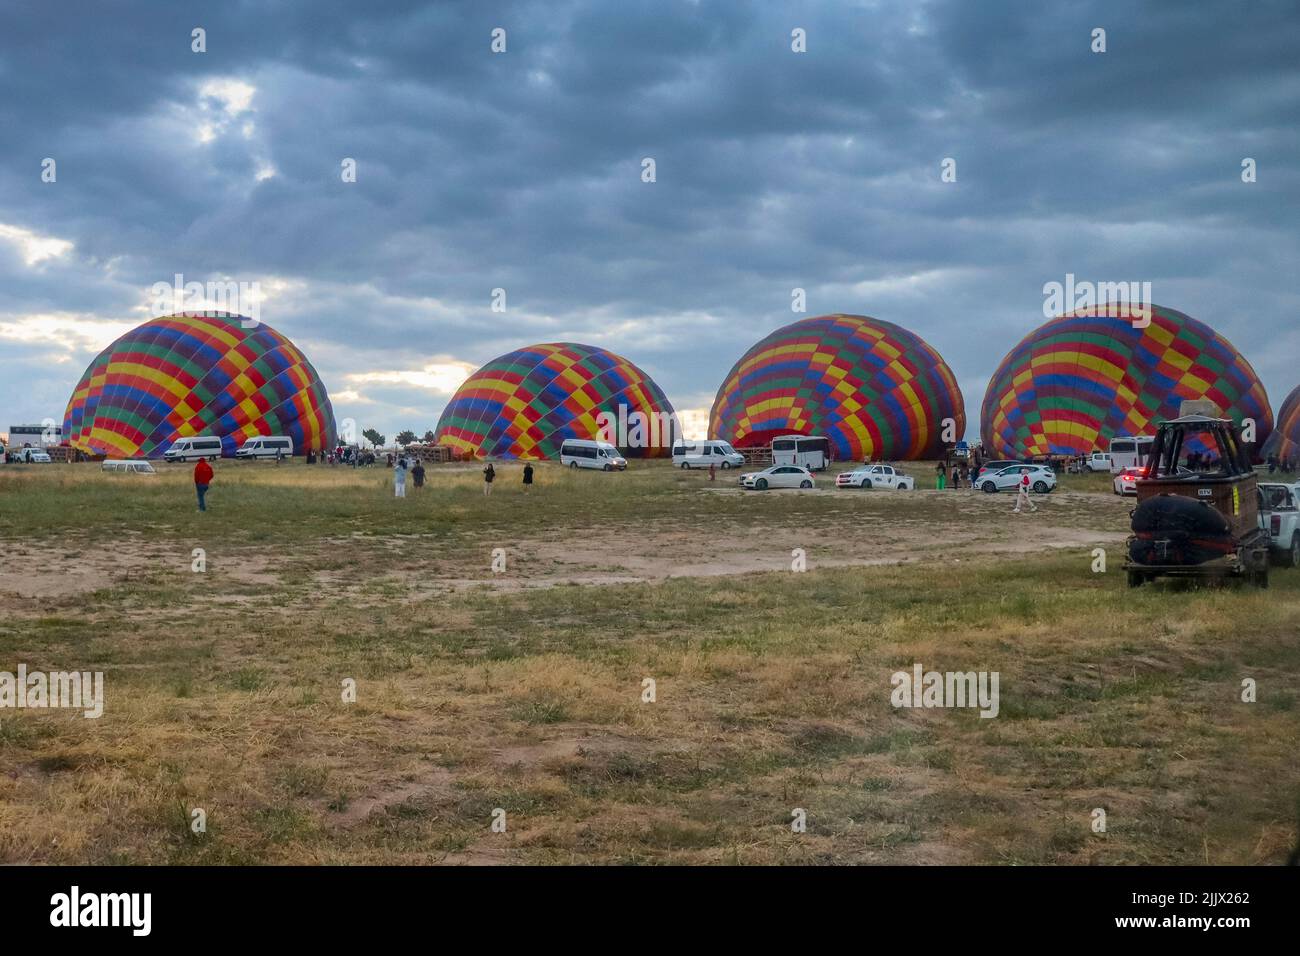 GOREME/TURKEY - June 27, 2022: balloons of the same color are inflated for flight. Stock Photo